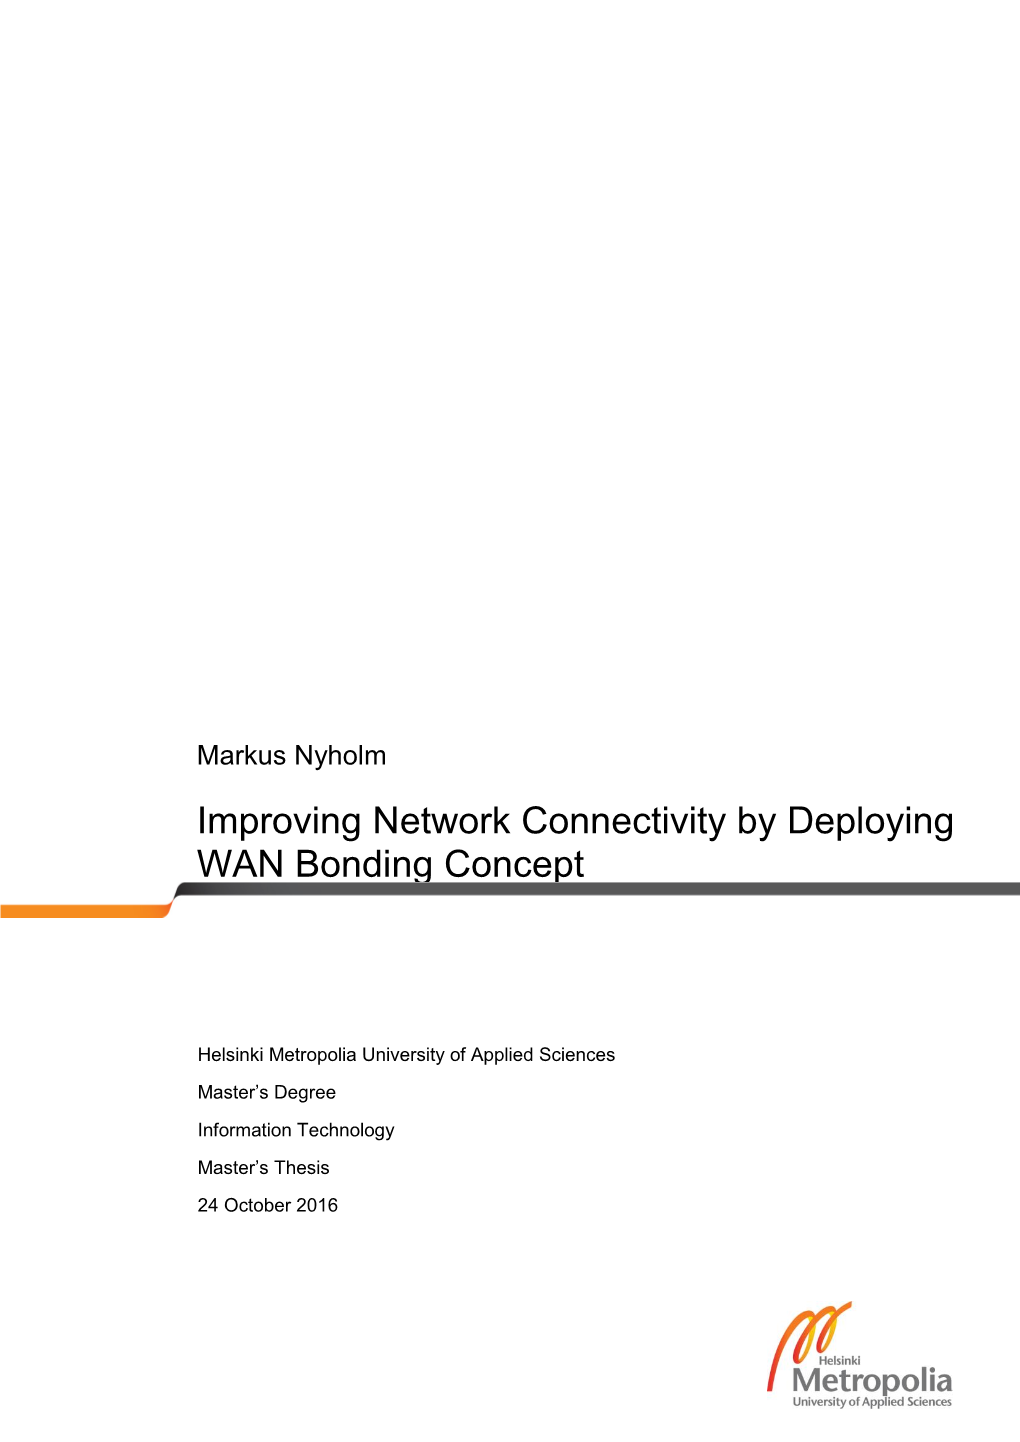 Improving Network Connectivity by Deploying WAN Bonding Concept